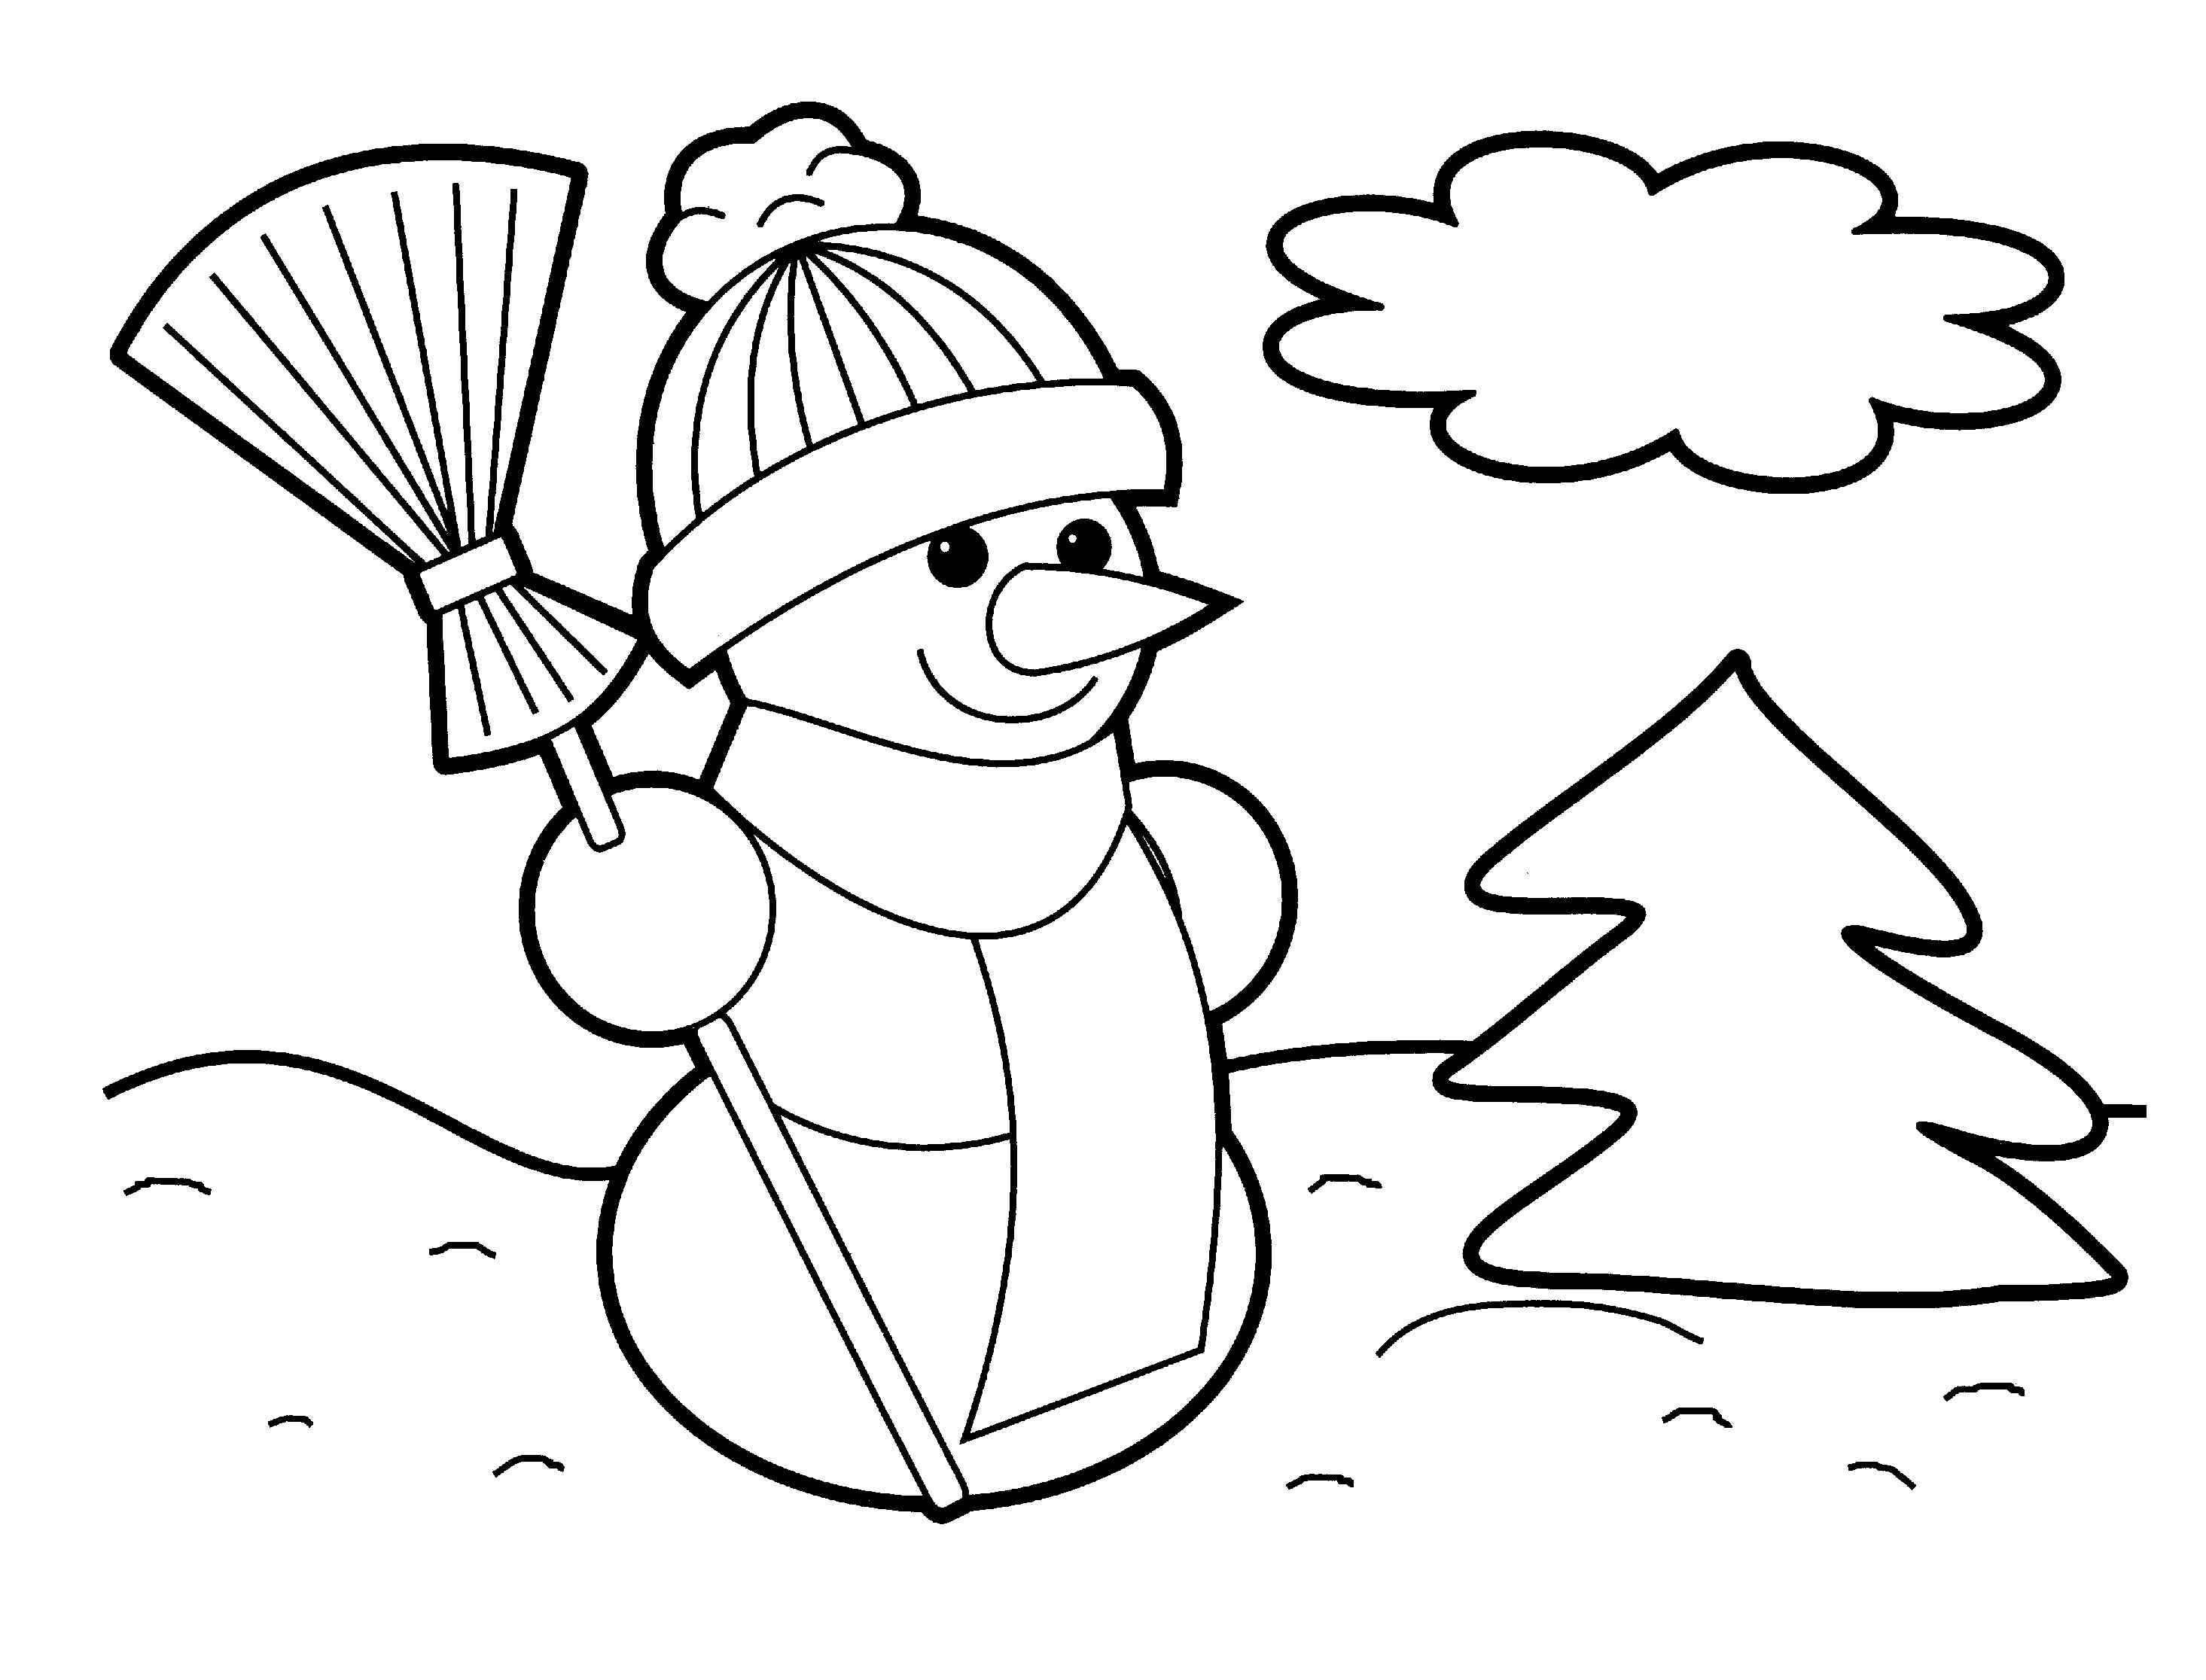 Coloring Pages Of Snowmen Coloring Pages Frostye Snowman Coloring Book Image Ideas Fresh